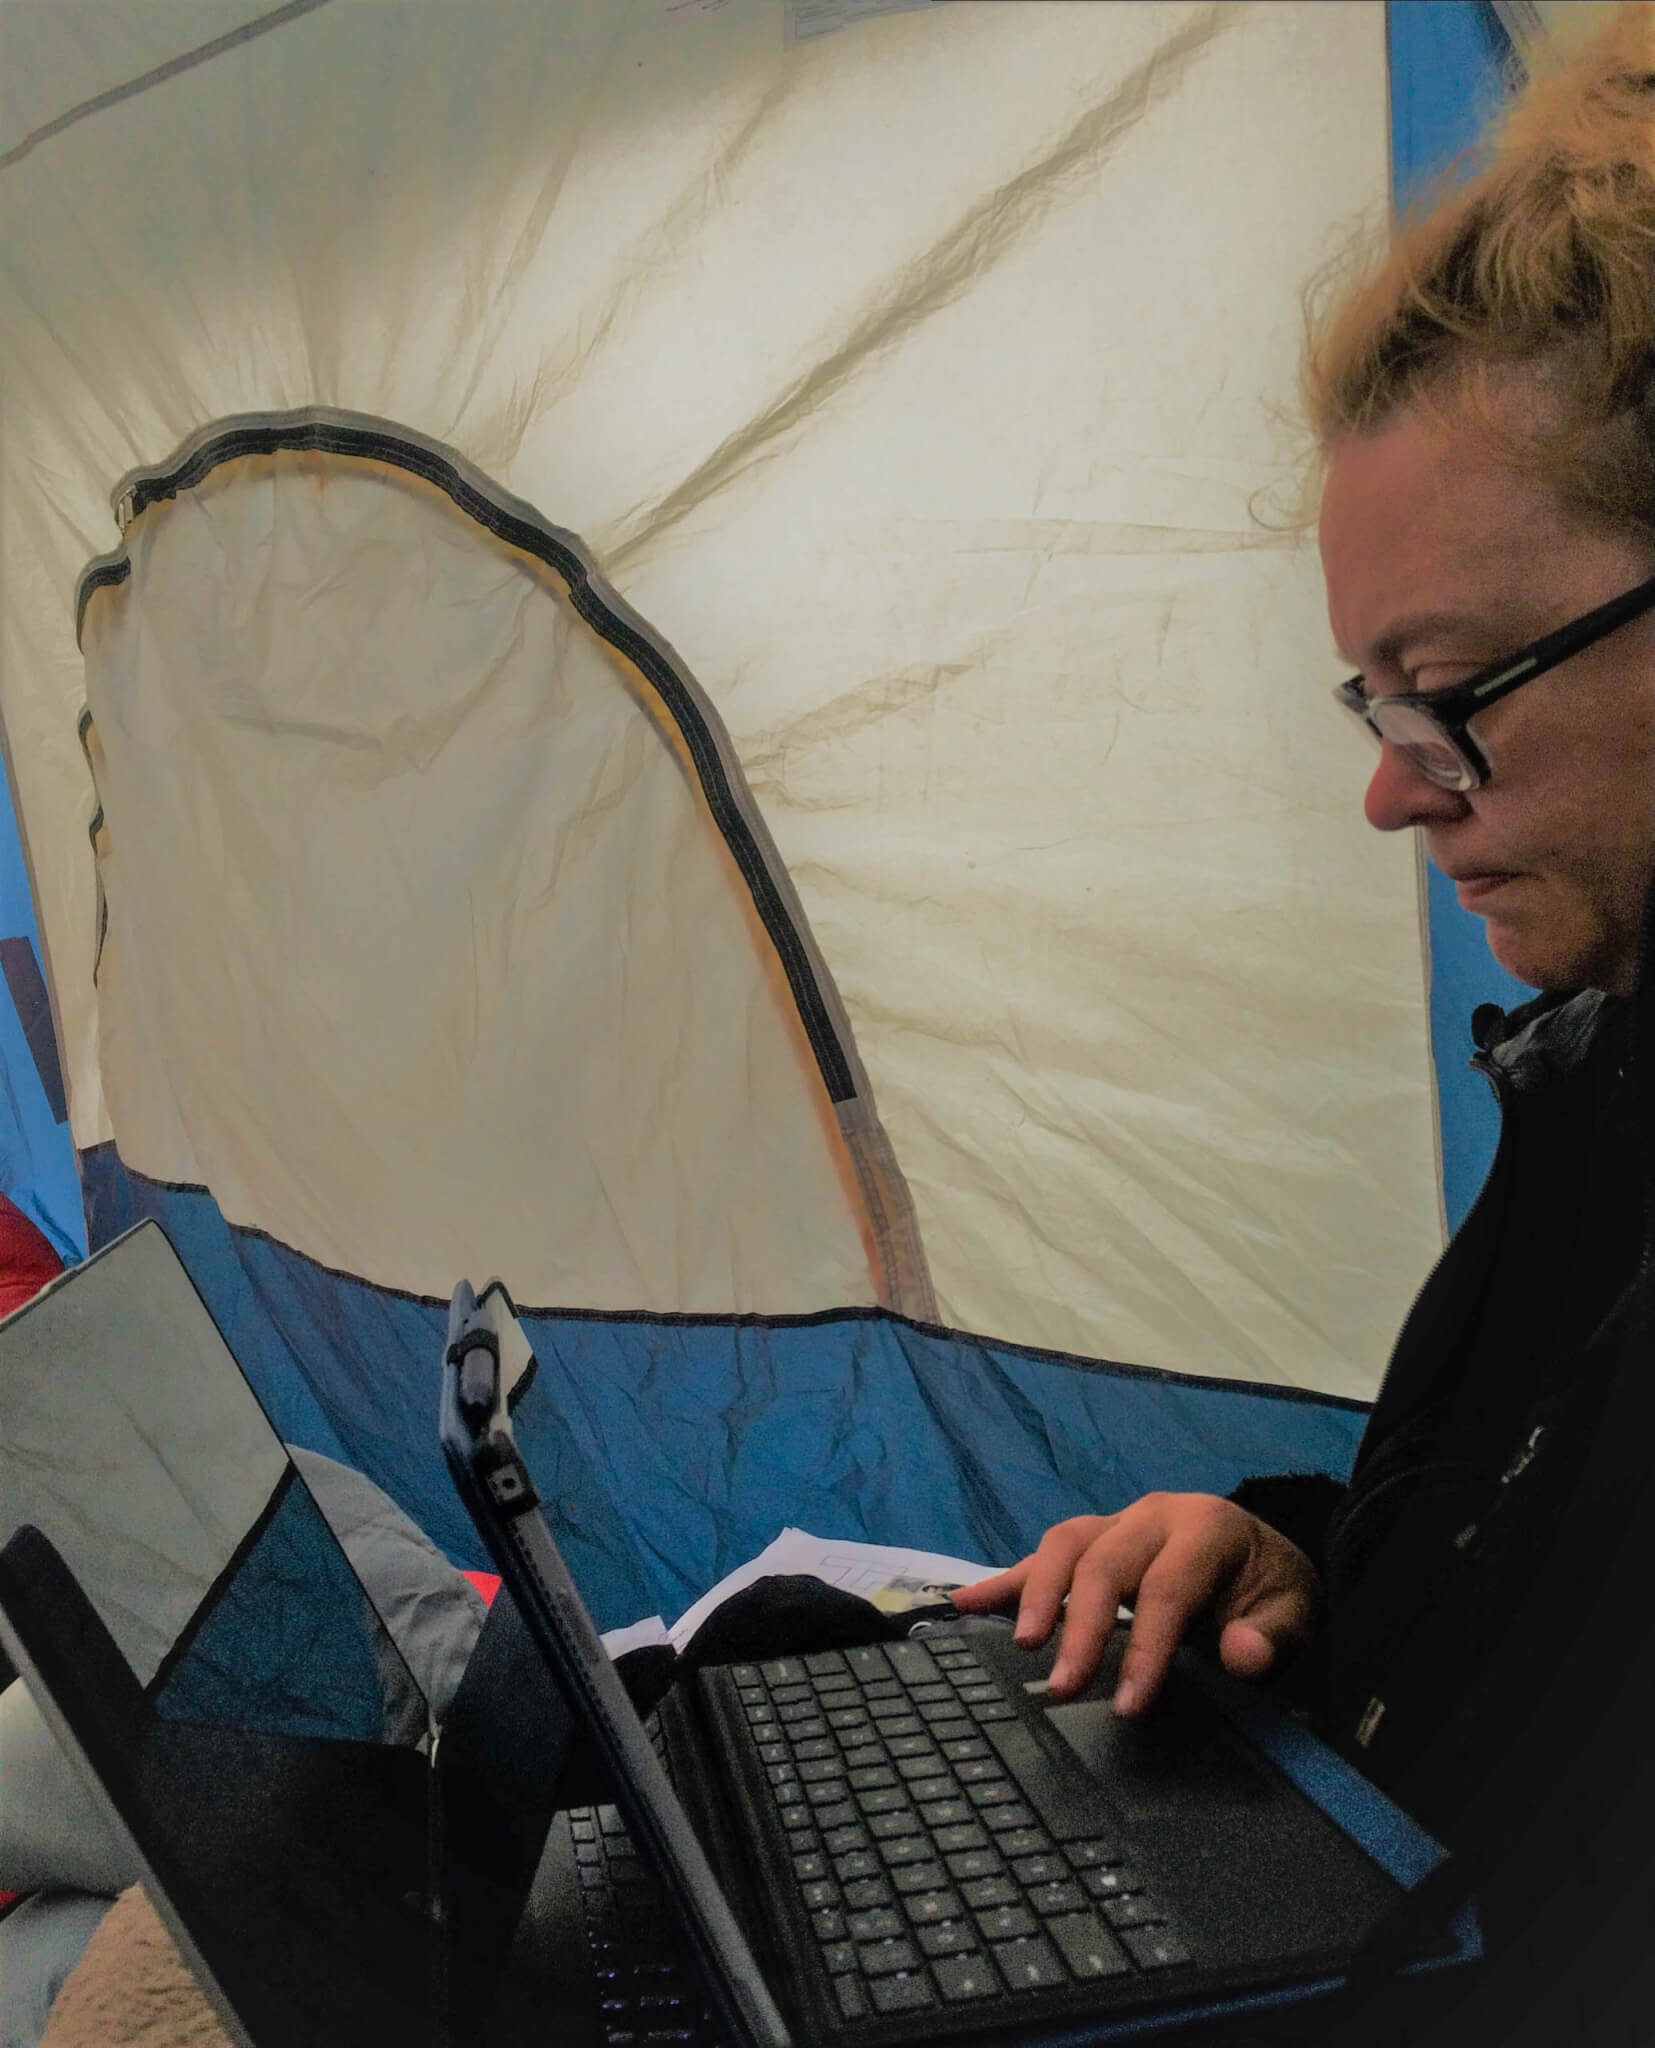 Uilani Ballay studying in a tent with two laptop computers